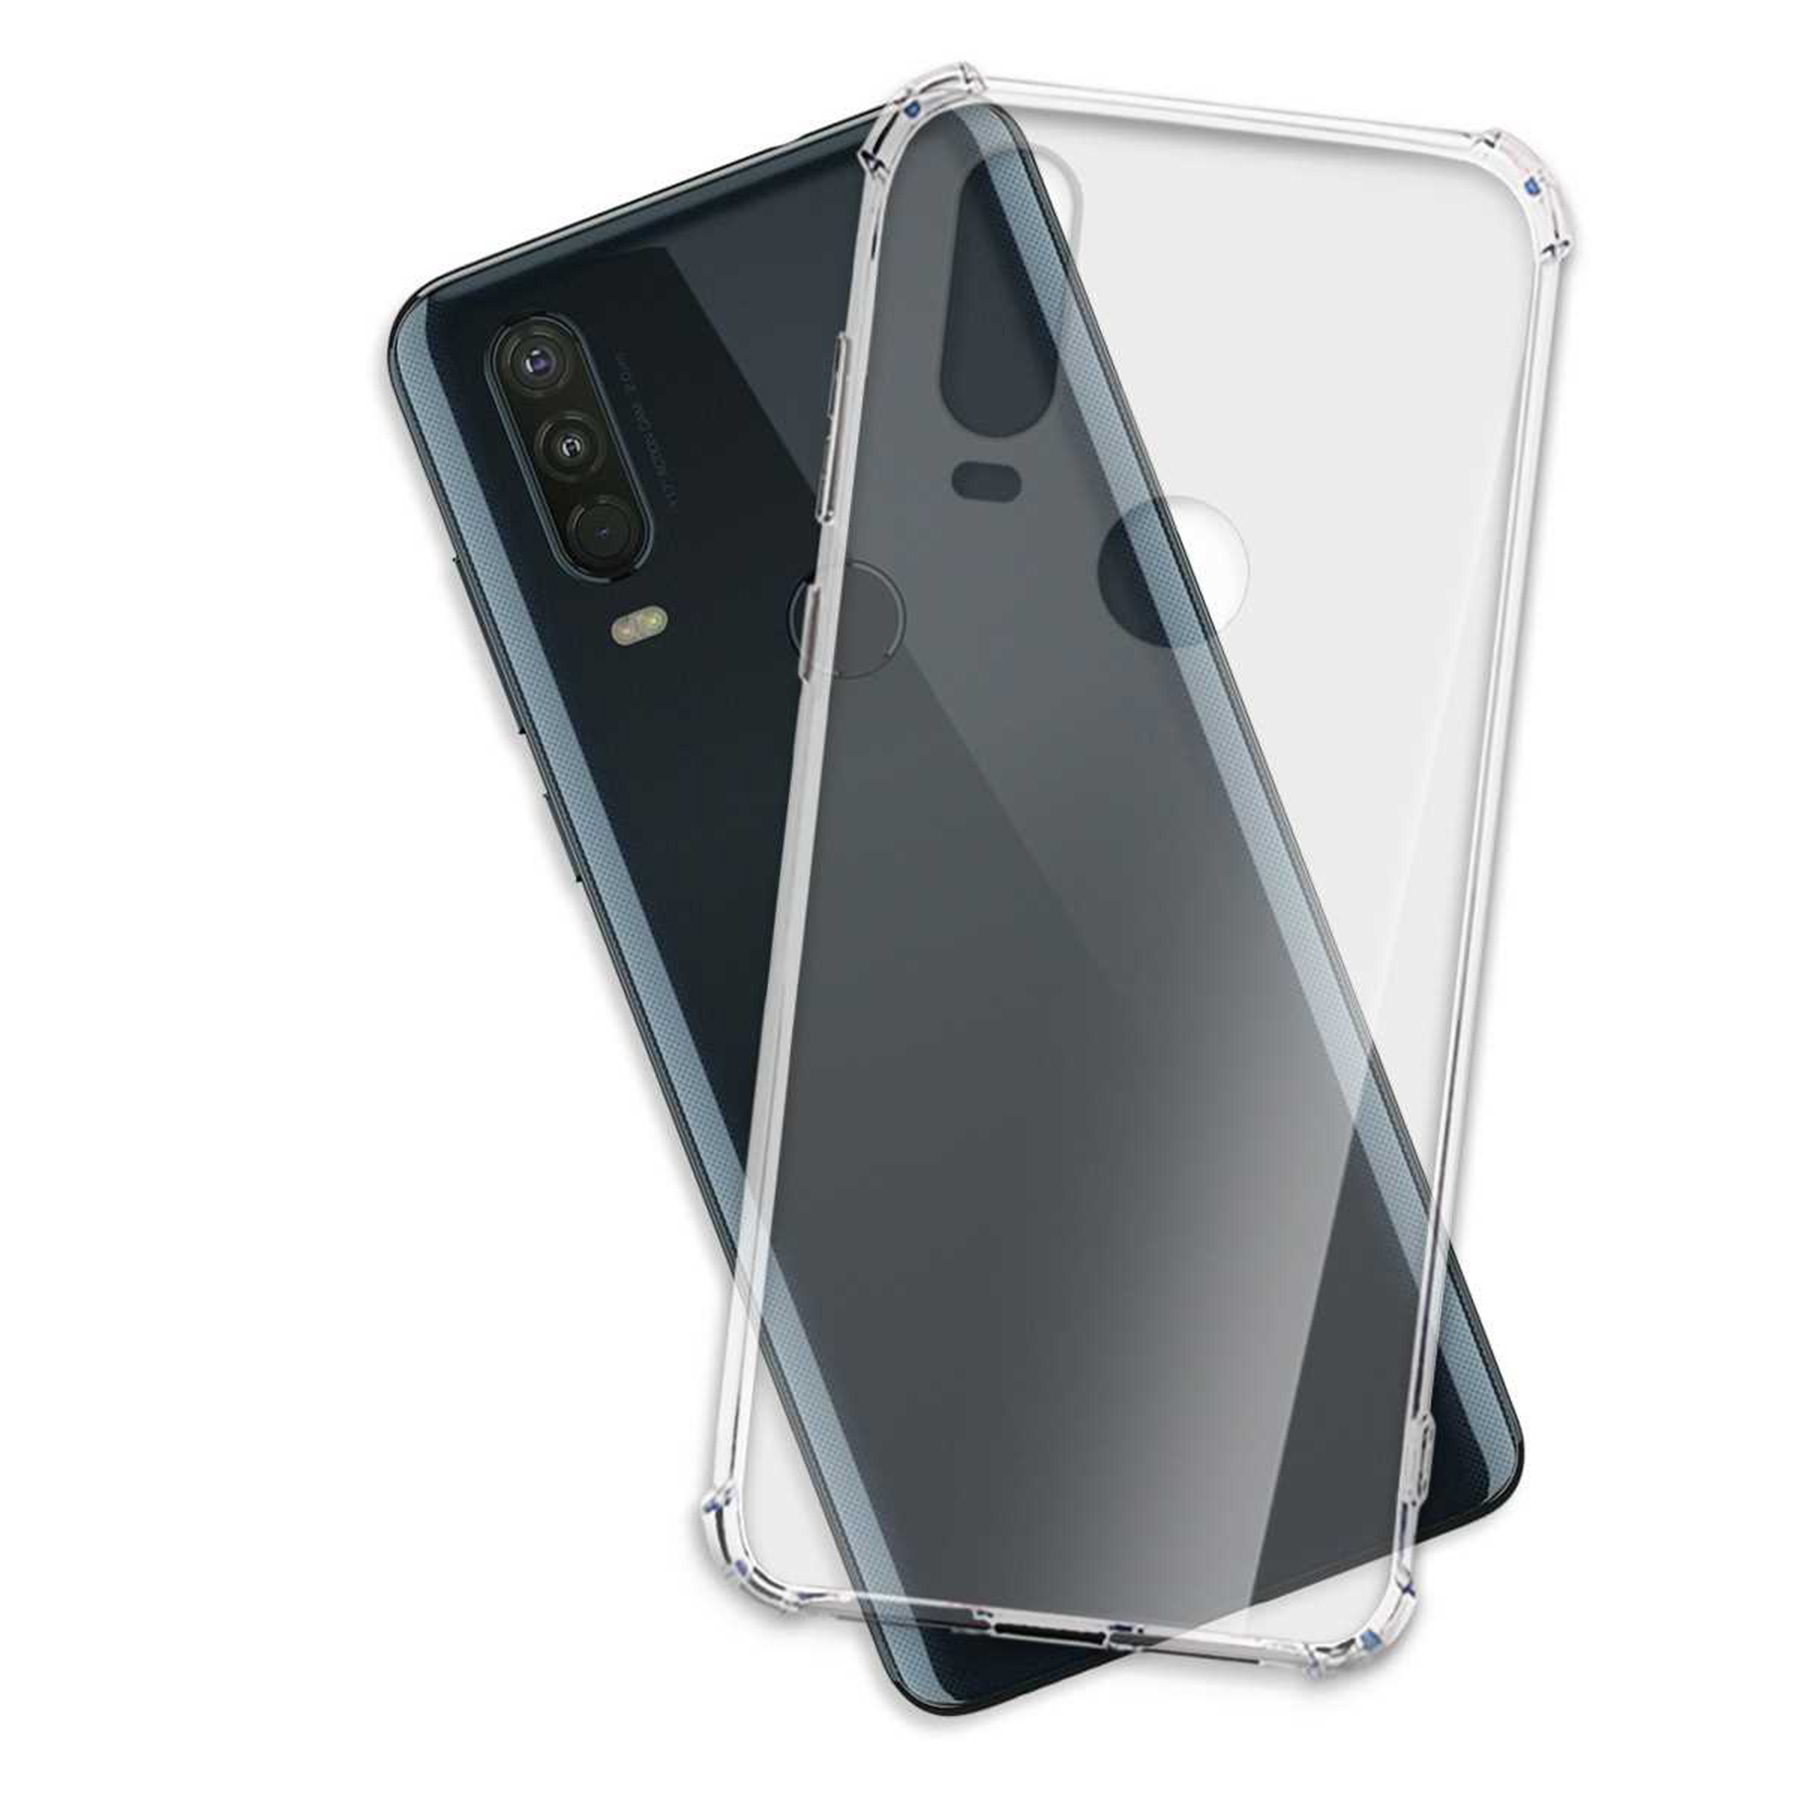 One Backcover, Case, Armor ENERGY Motorola, Clear Action, MORE Transparent MTB